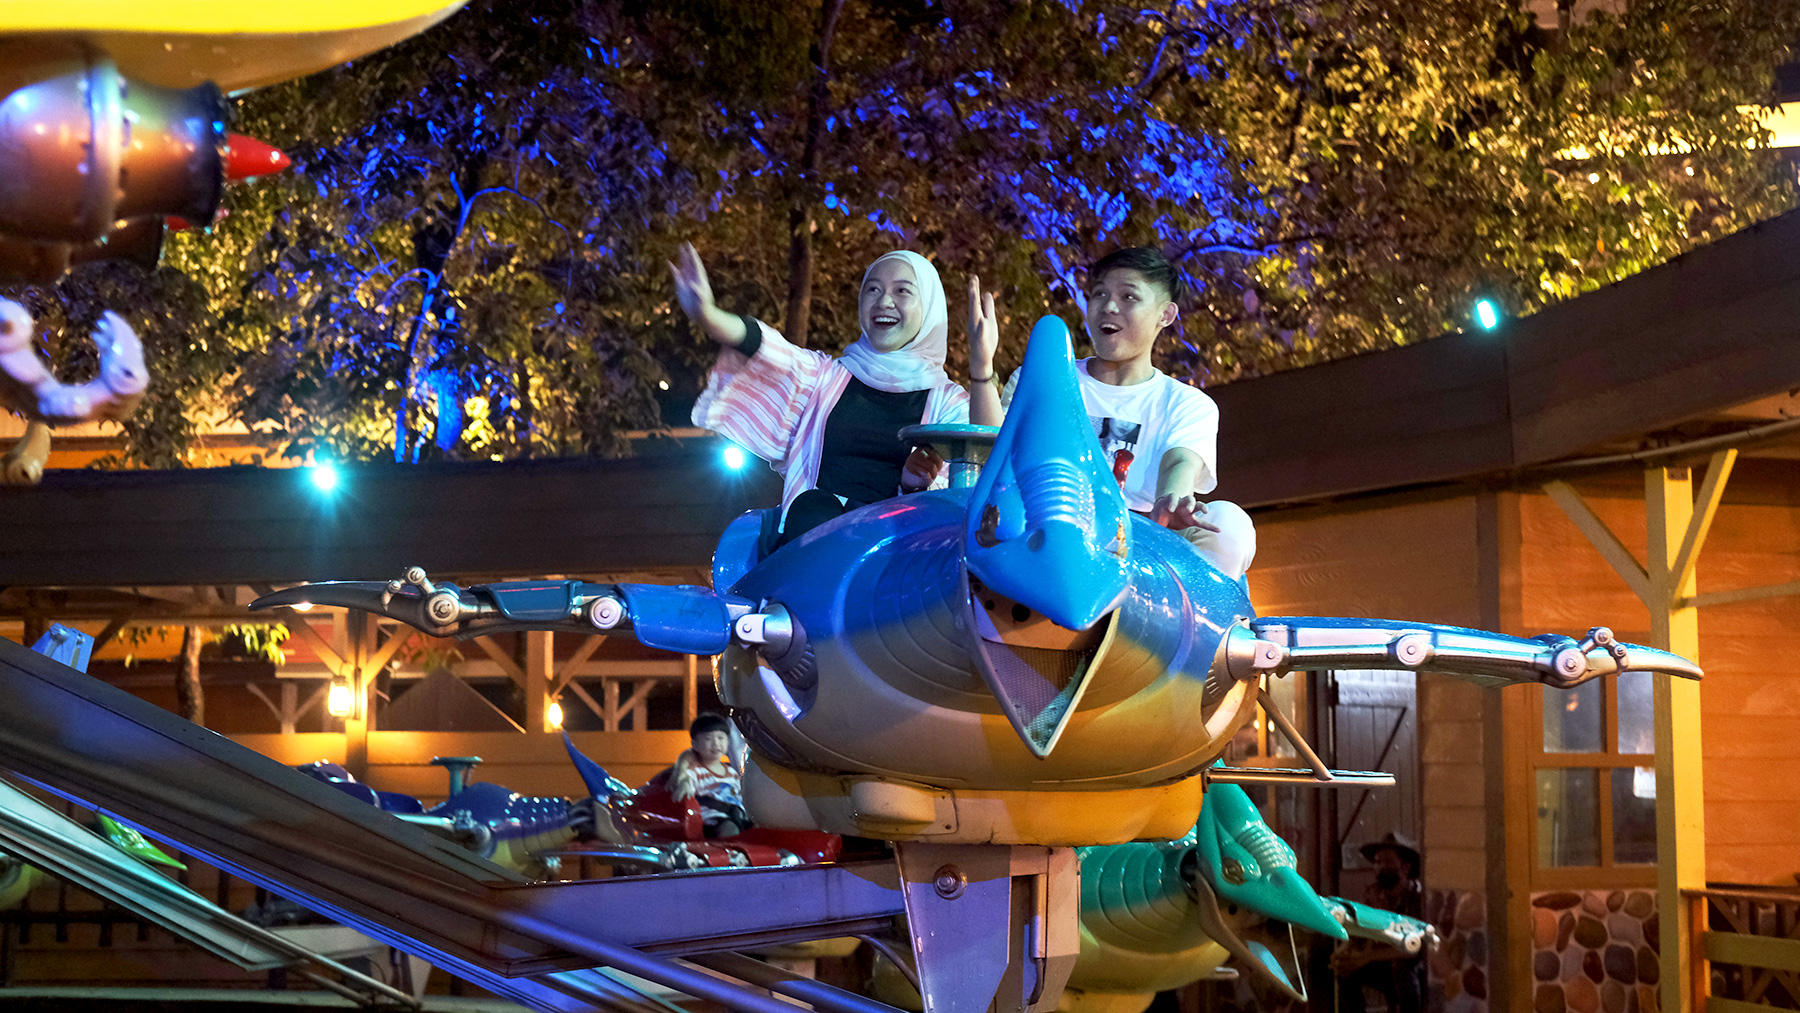 Bring your little ones along for a soaring ride on the Vultures, a kid-friendly ride!